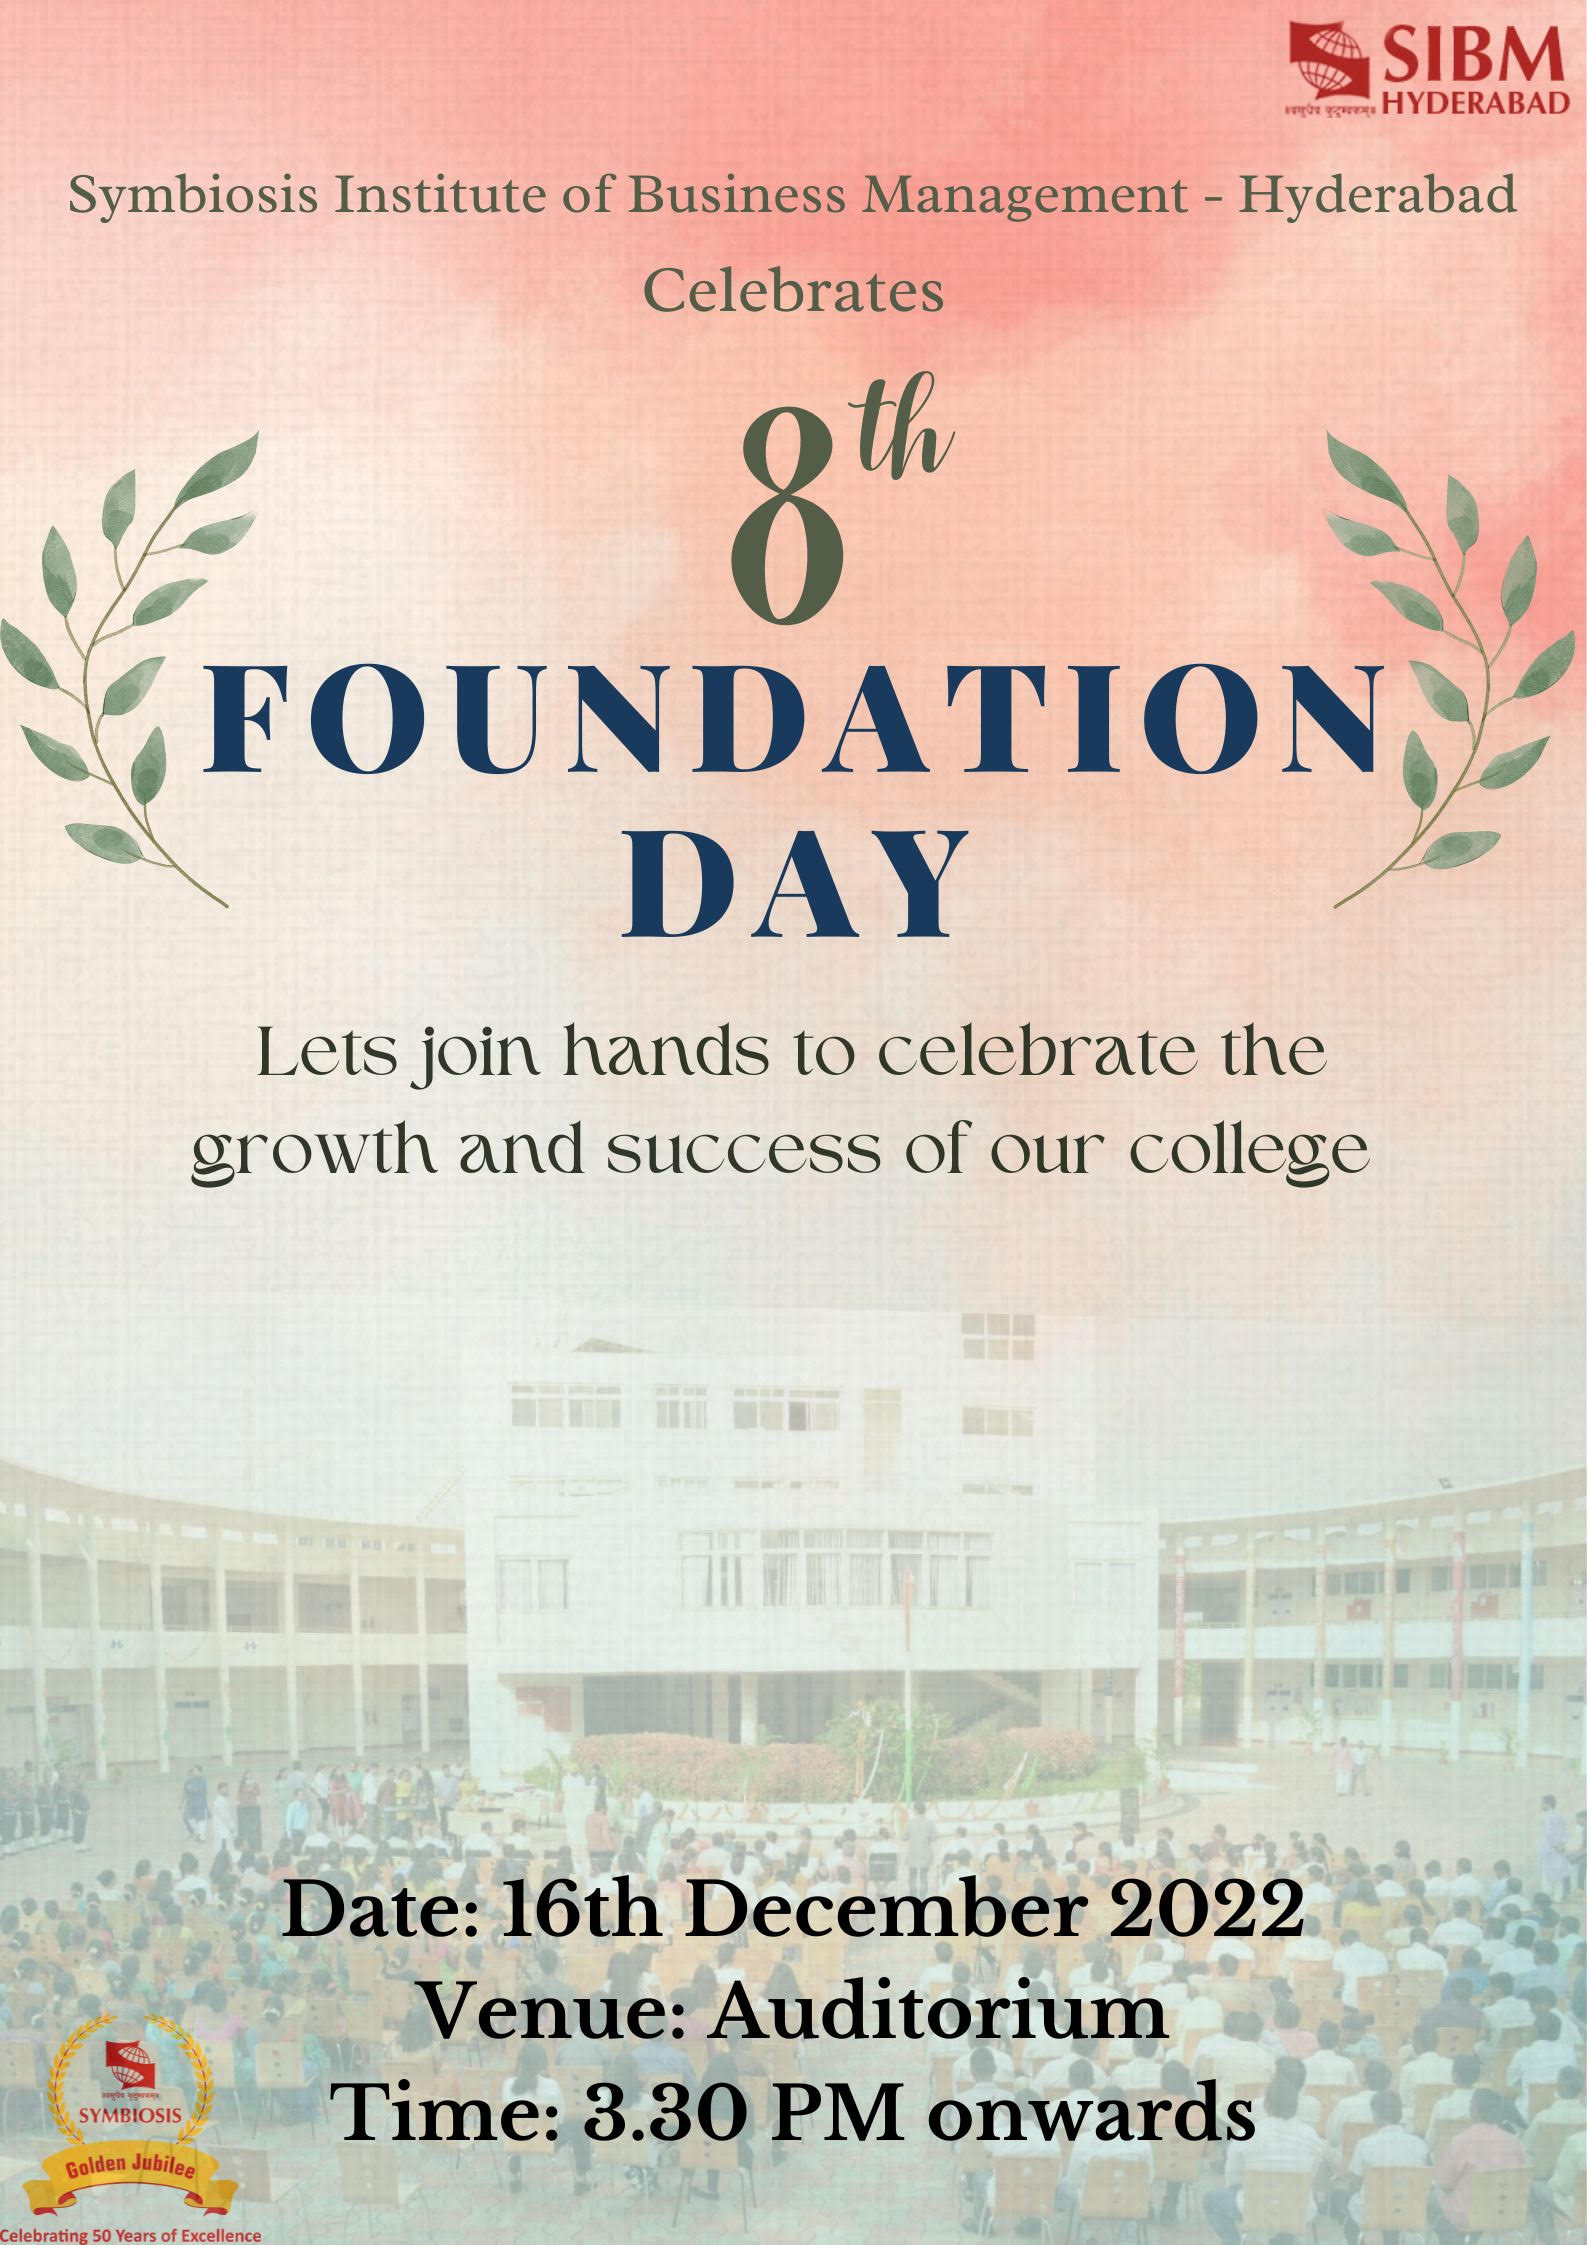 The celebration of 8th Foundation Day